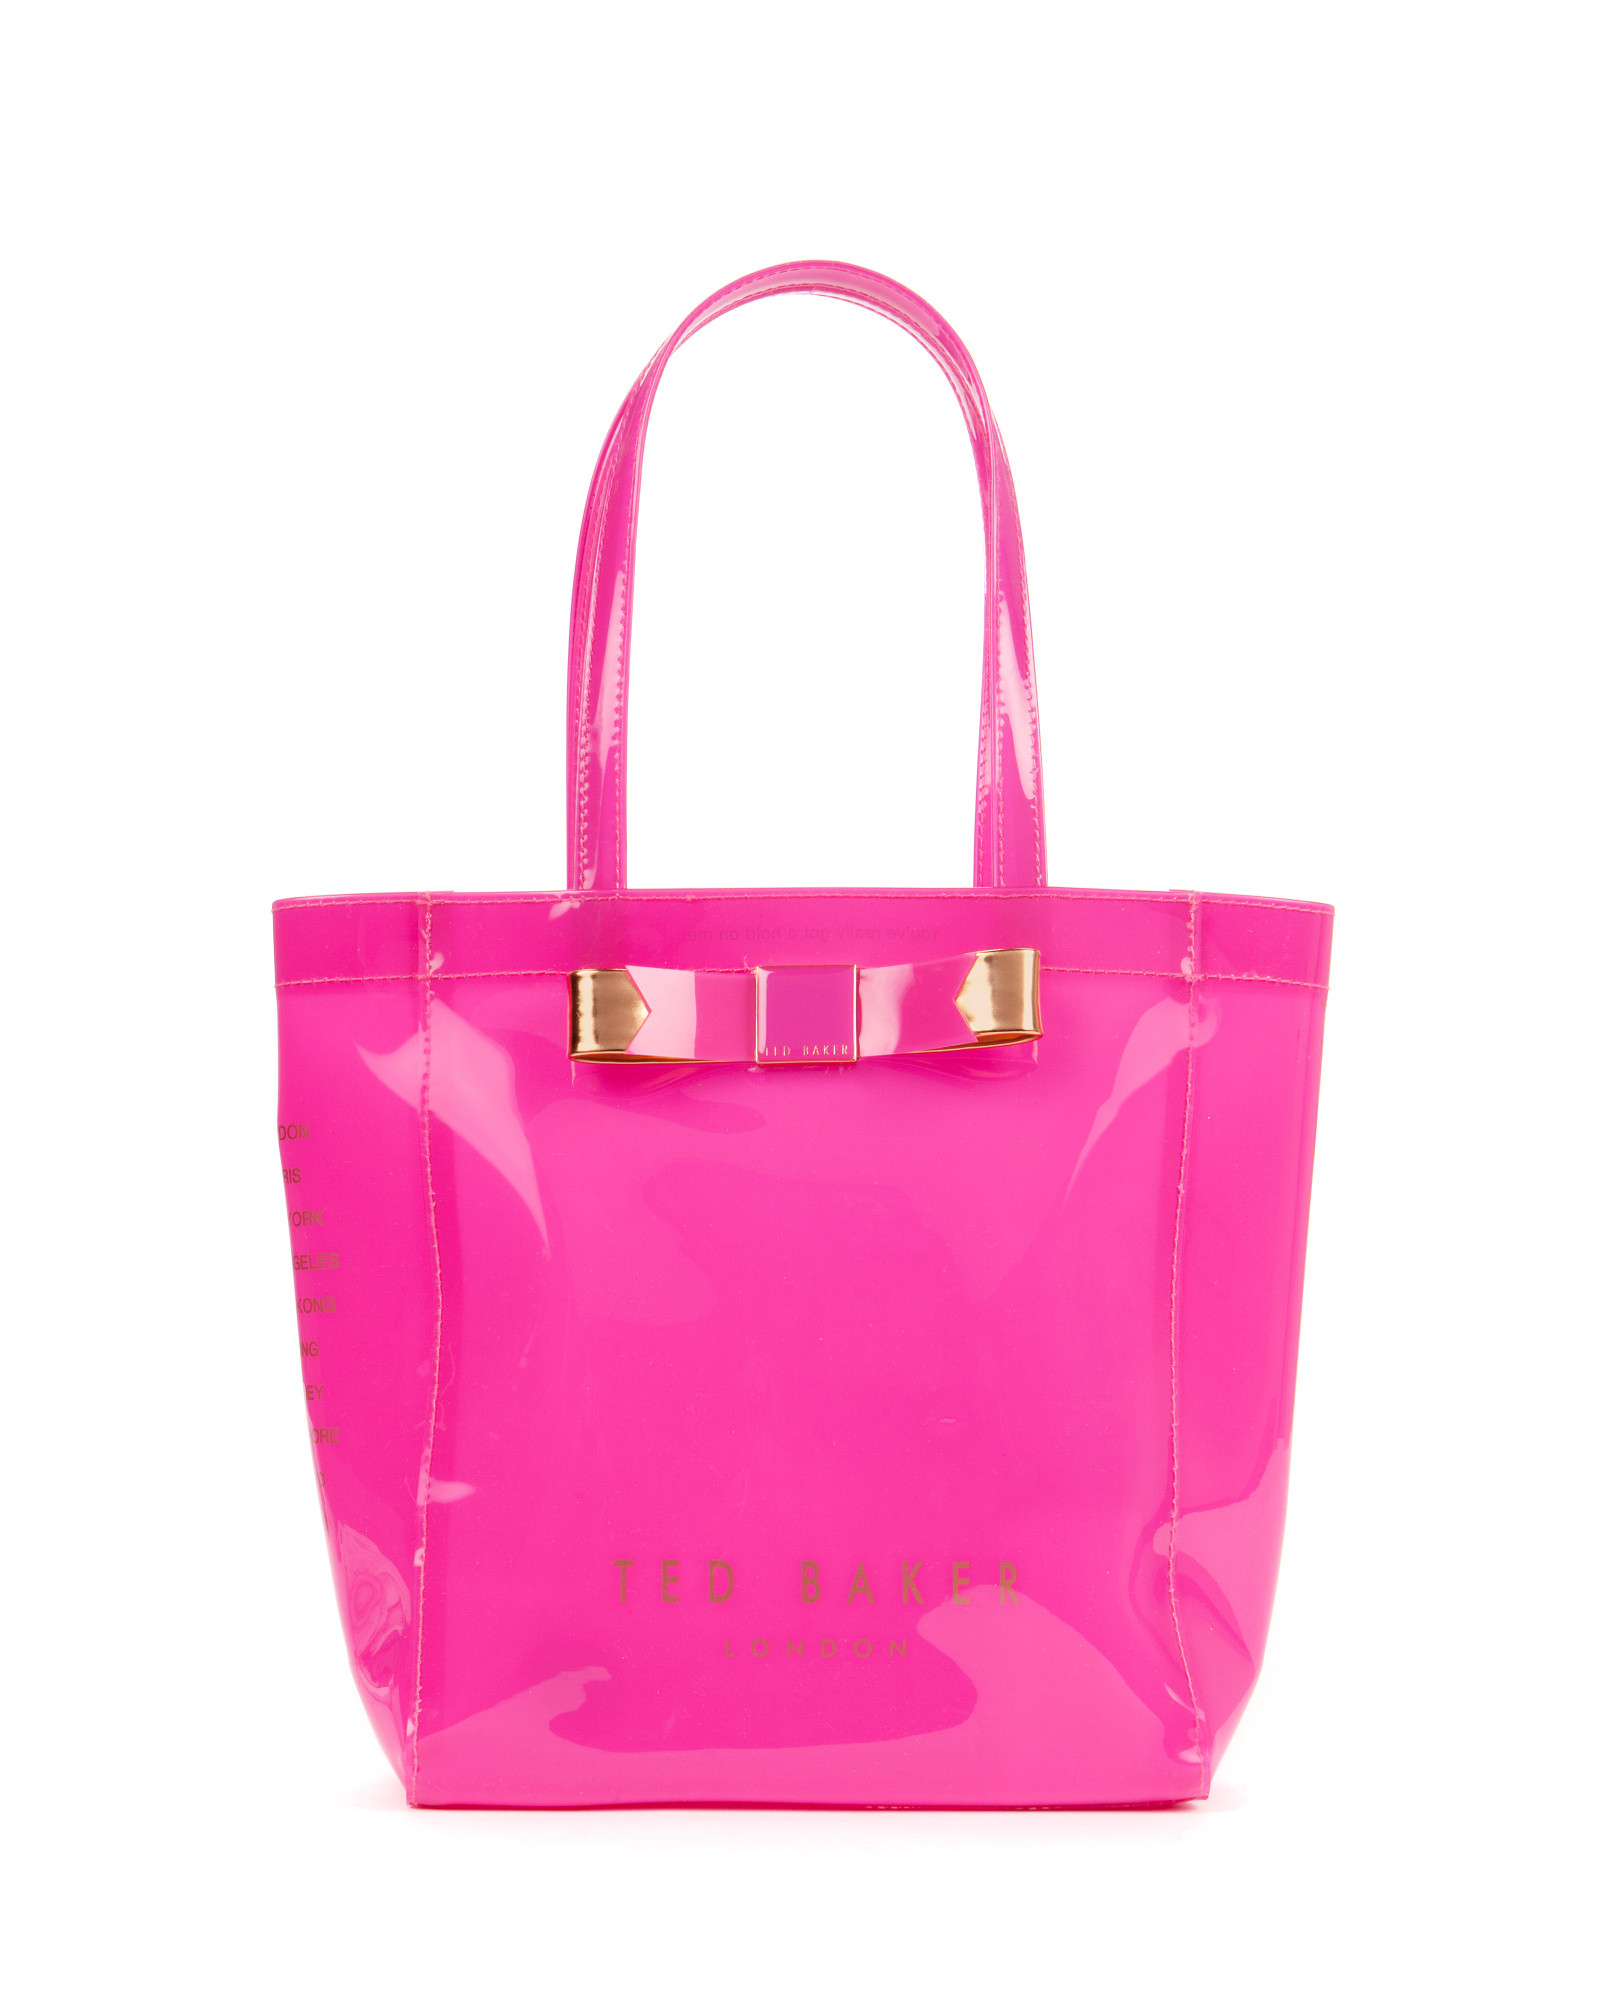 Ted Baker Small Bow Shopper Bag in Bright Pink (Pink) - Lyst